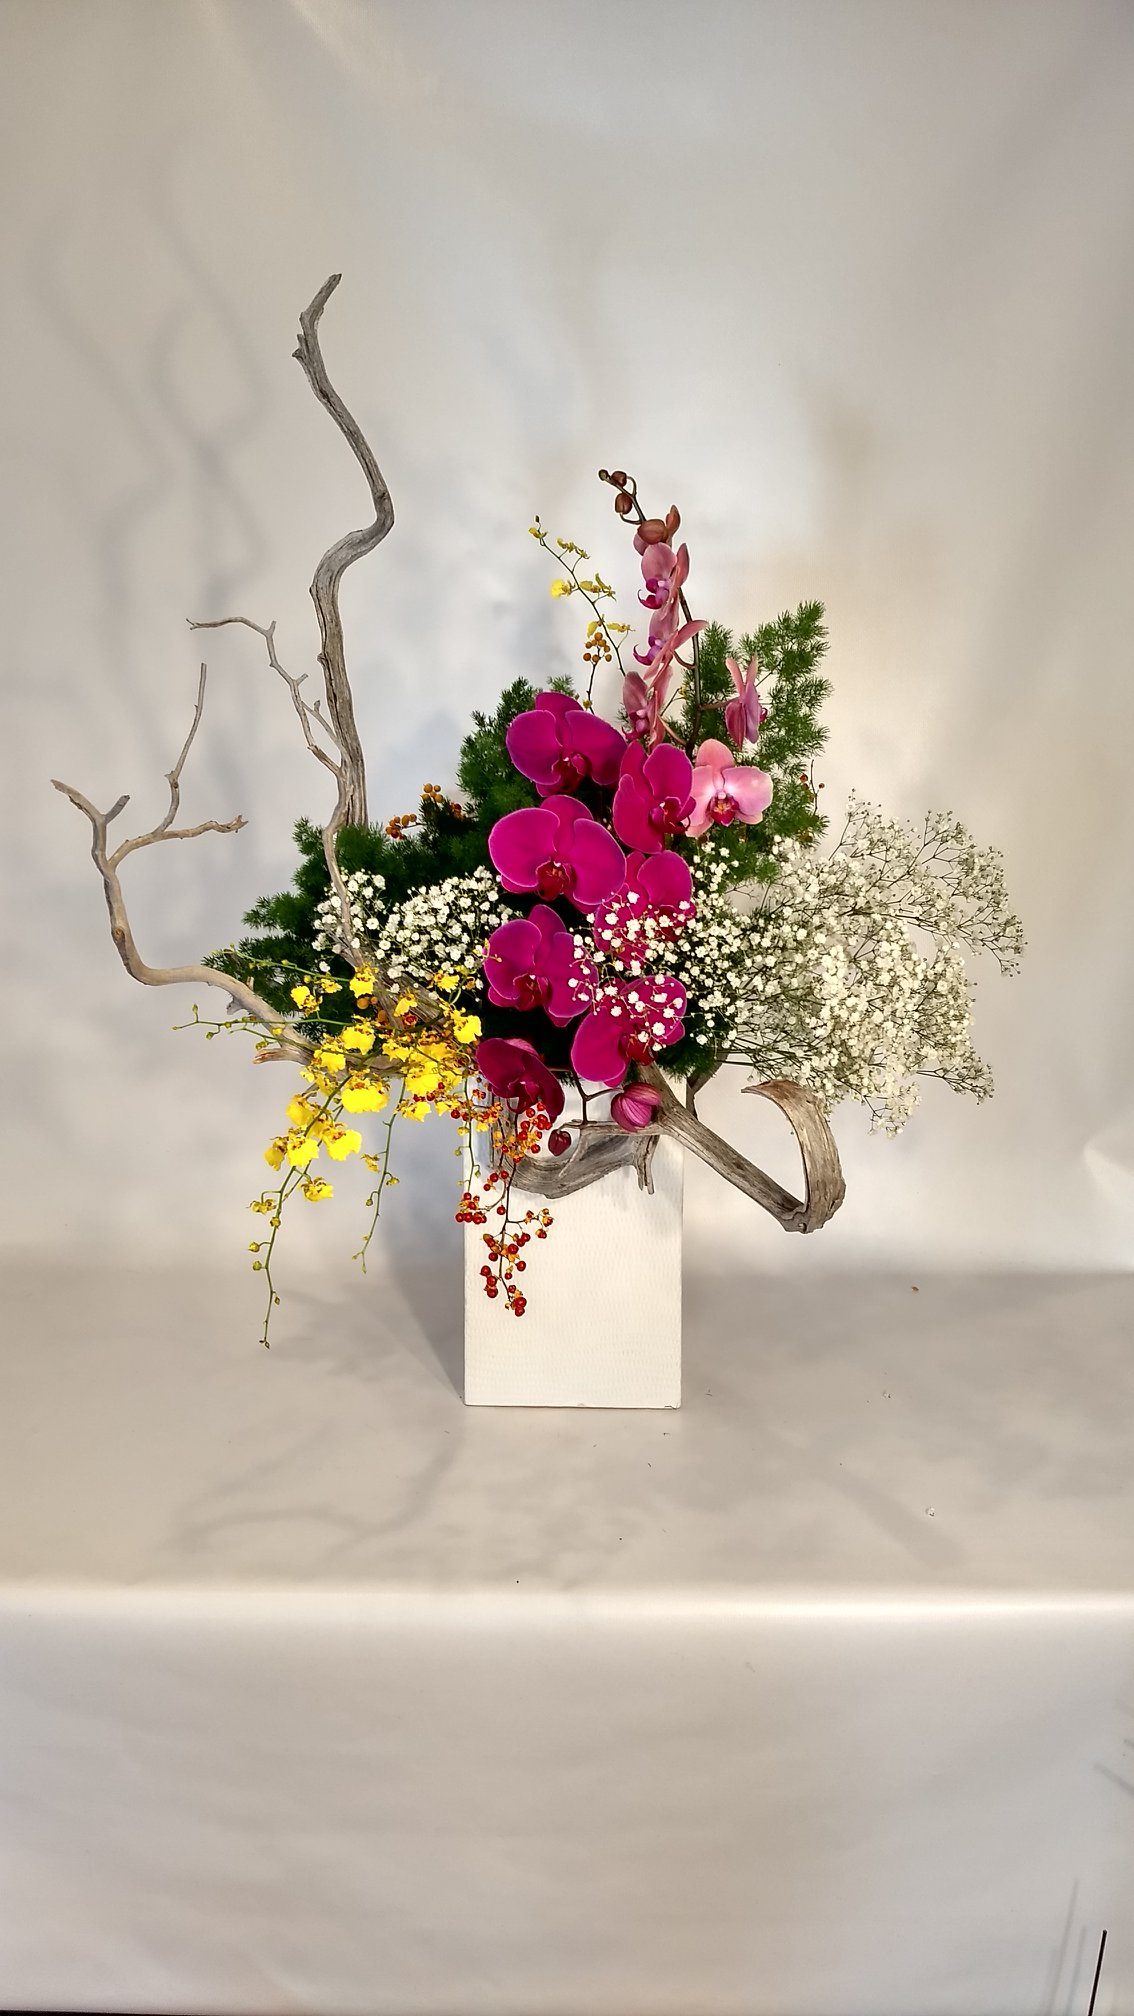 About – Ikebana by Megumi